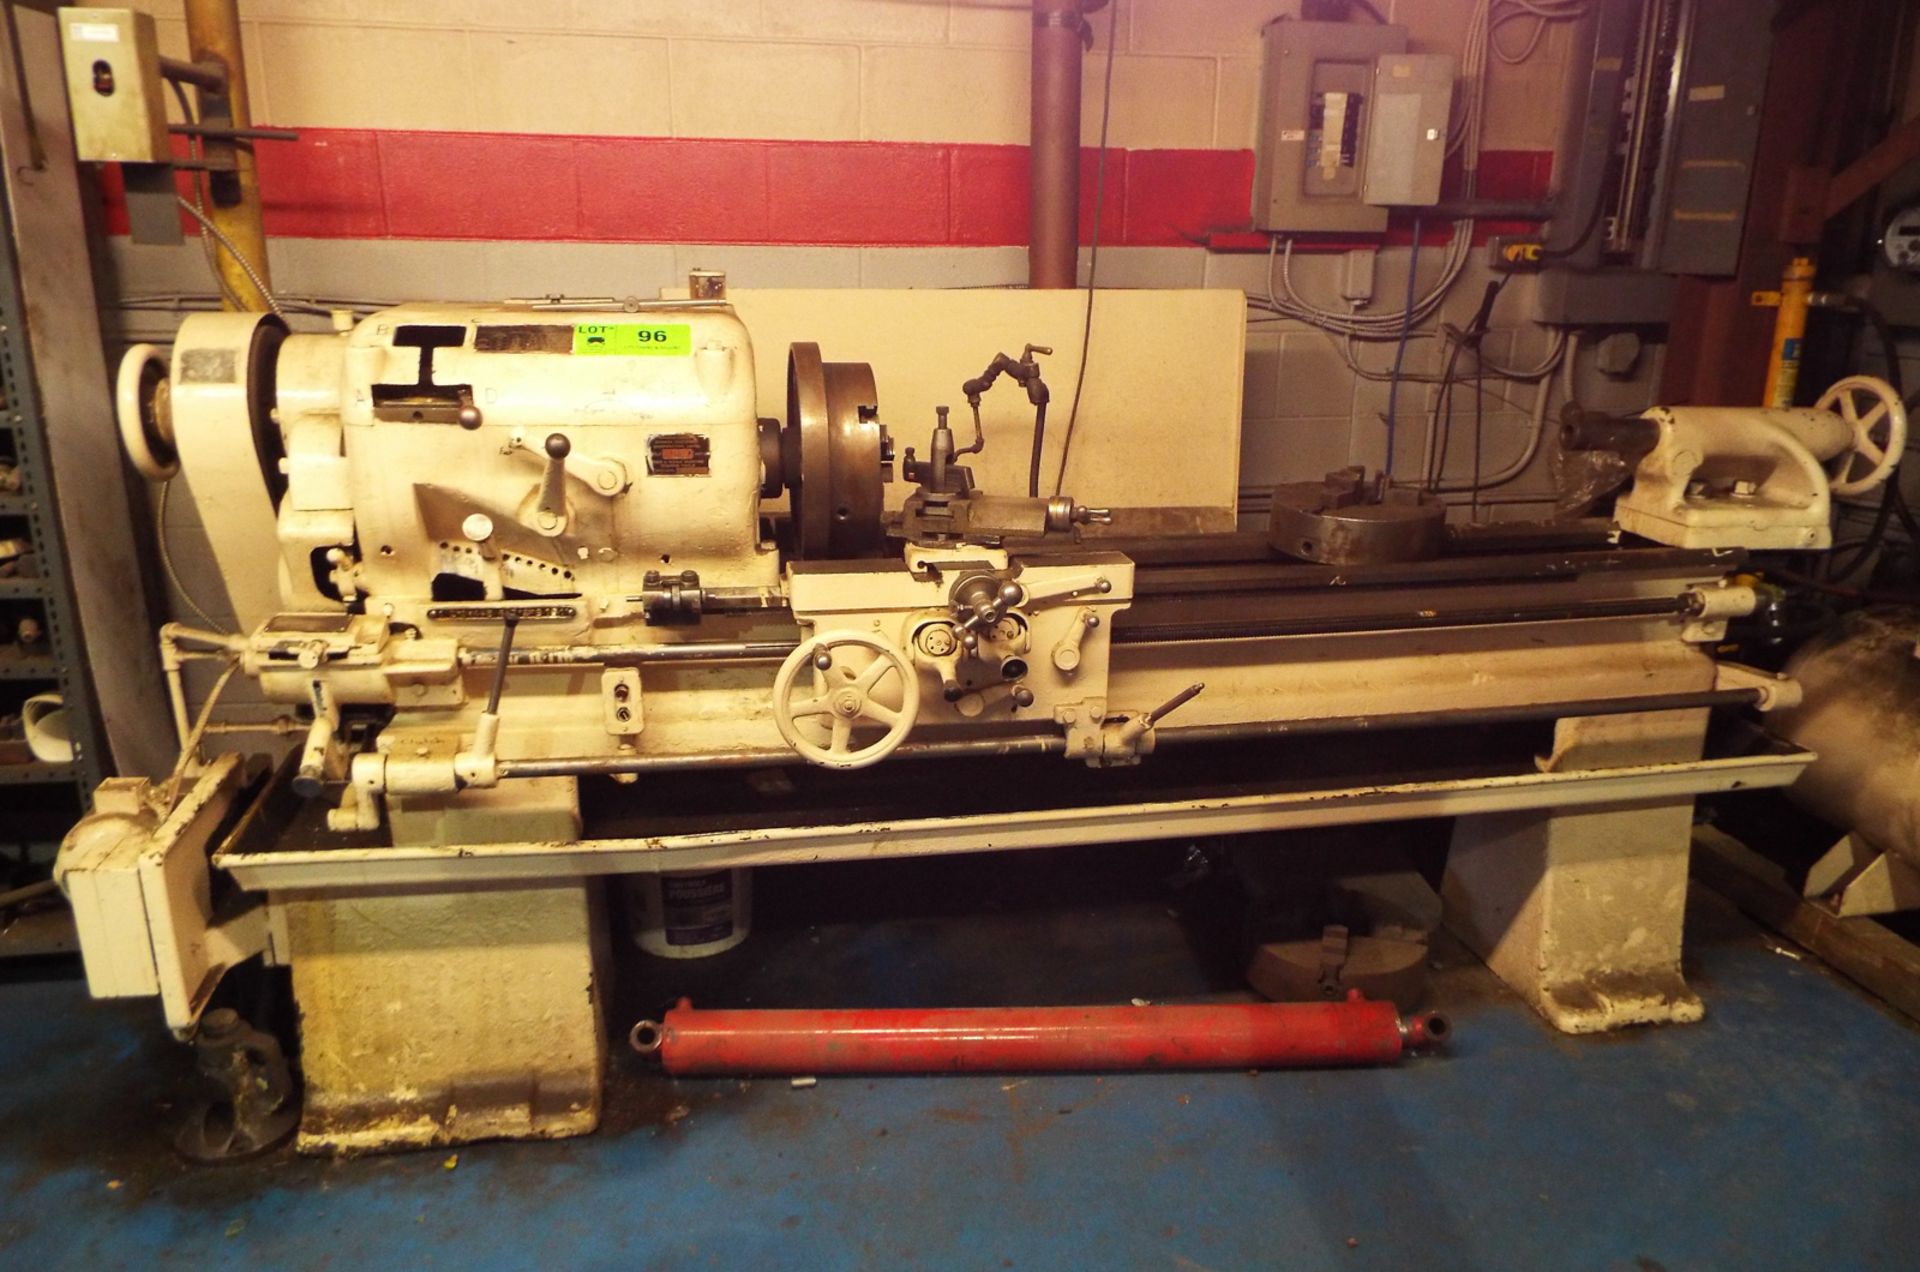 CANADA MACHINERY CORP. ENGINE LATHE WITH APPROX. 58" BETWEEN CENTERS, 1.5" SPINDLE BORE, 13" 3-JAW